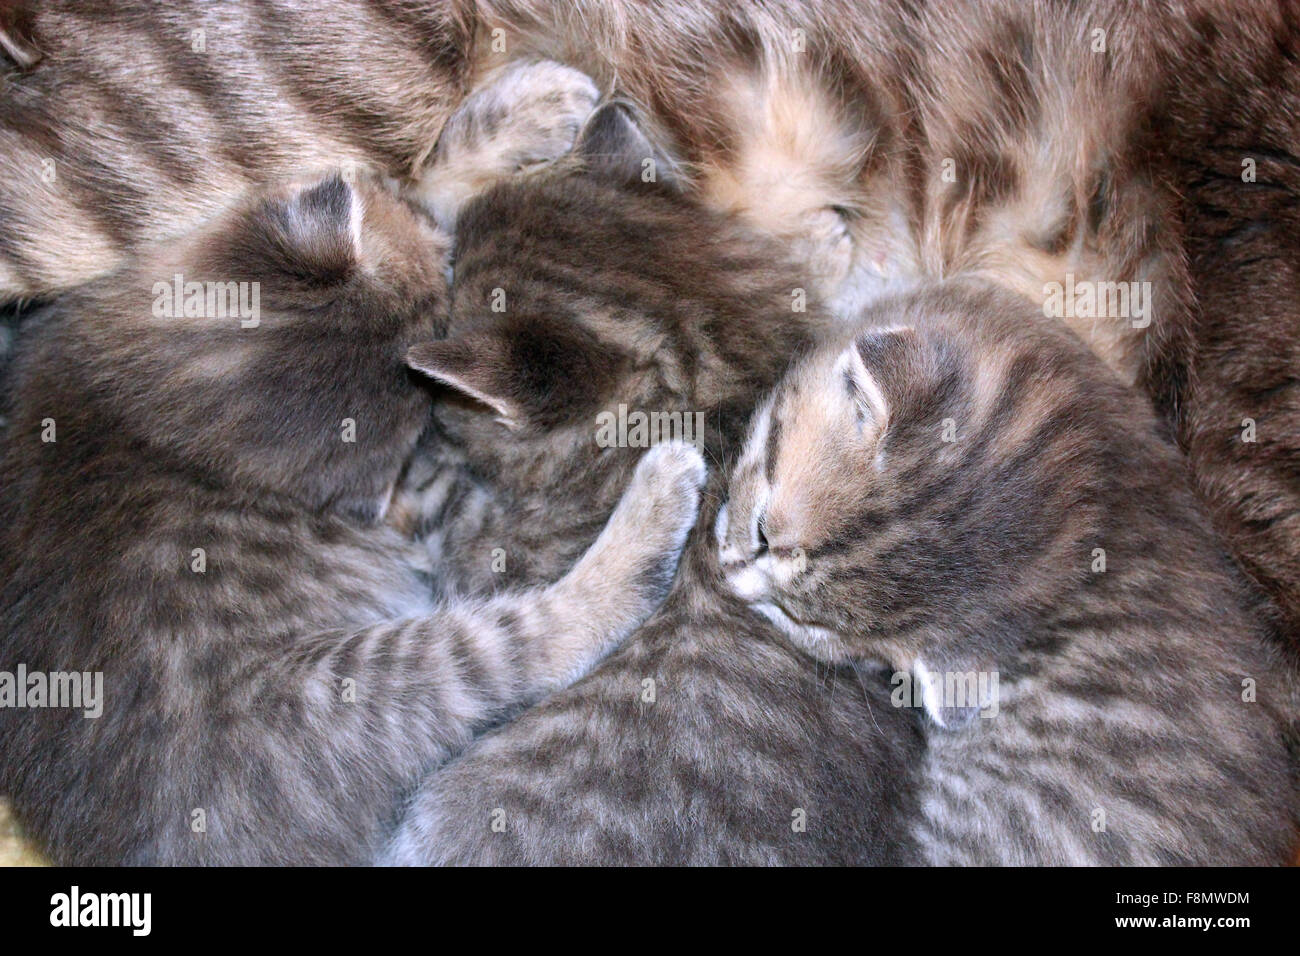 kittens of Scottish Straight breed drinking milk from his mother Stock Photo